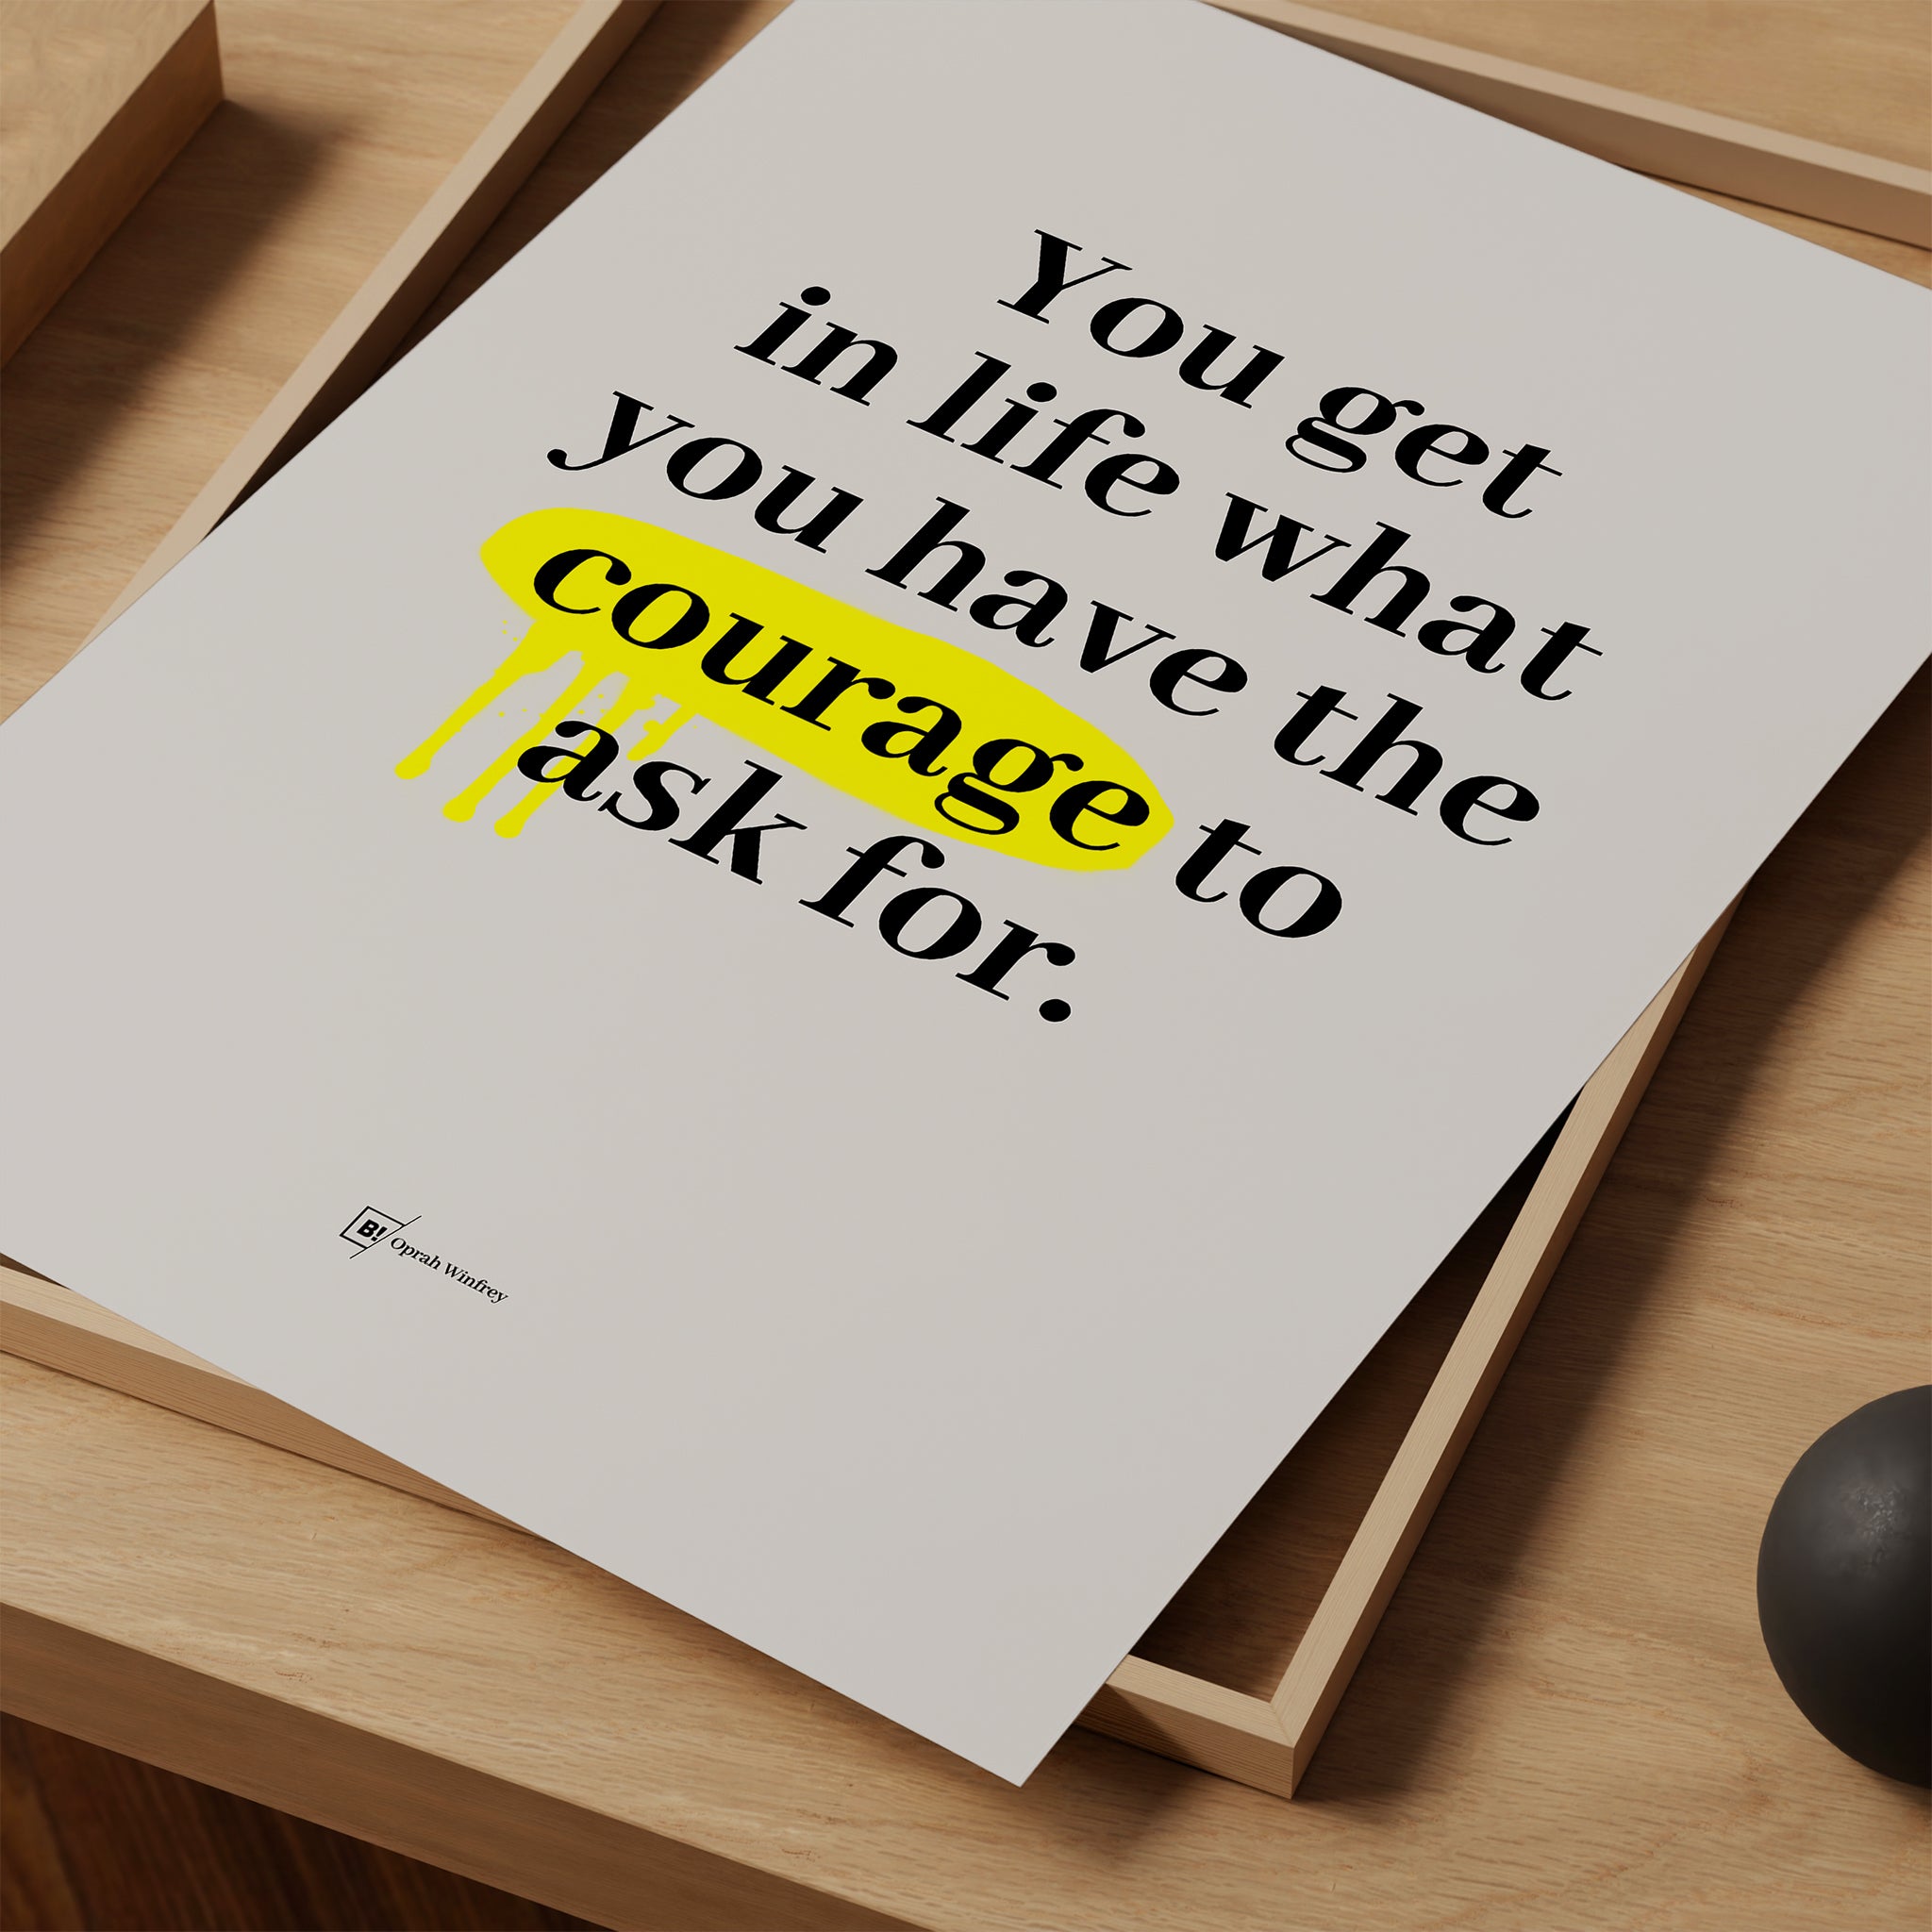 Be inspired by Oprah Winfrey's famous "You get in life what you have the courage to ask for" quote art print. This artwork was printed using giclée on archival acid-free paper and is presented as a print close-up that captures its timeless beauty in every detail.